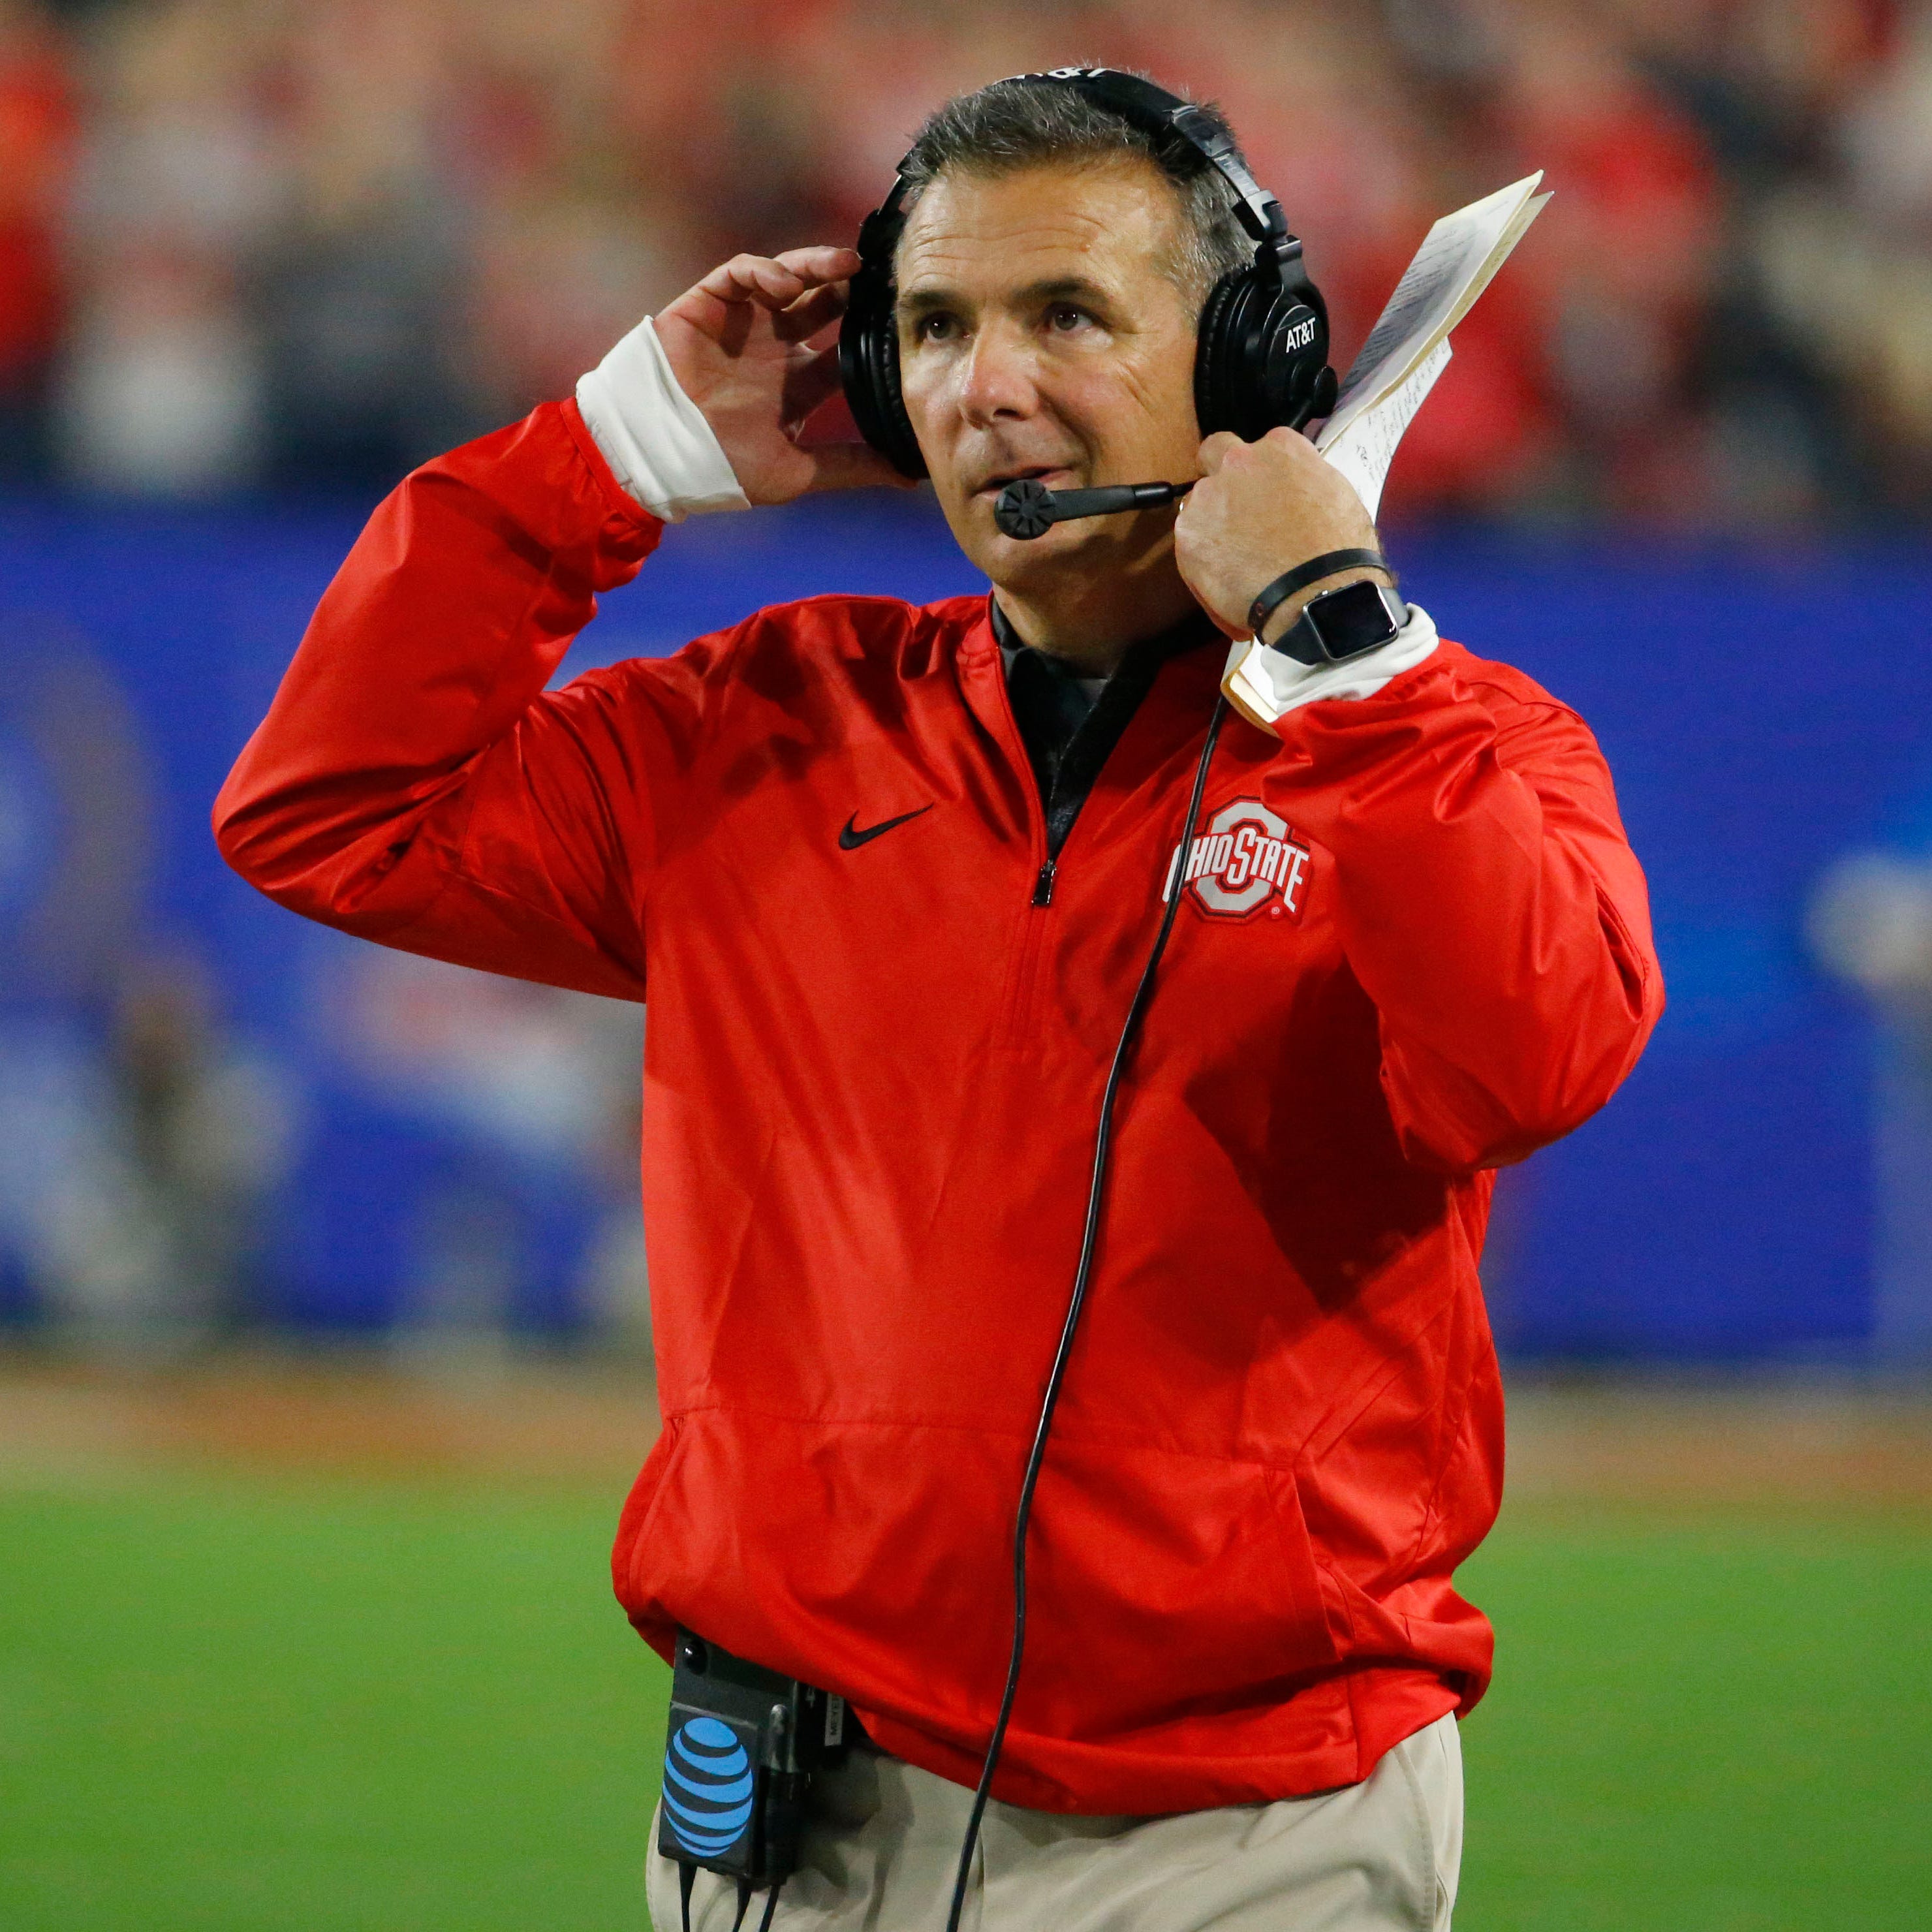 Ohio State suspended Urban Meyer for three games after investigators concluded he mishandled Zach Smith's repeated professional and behavioral problems.